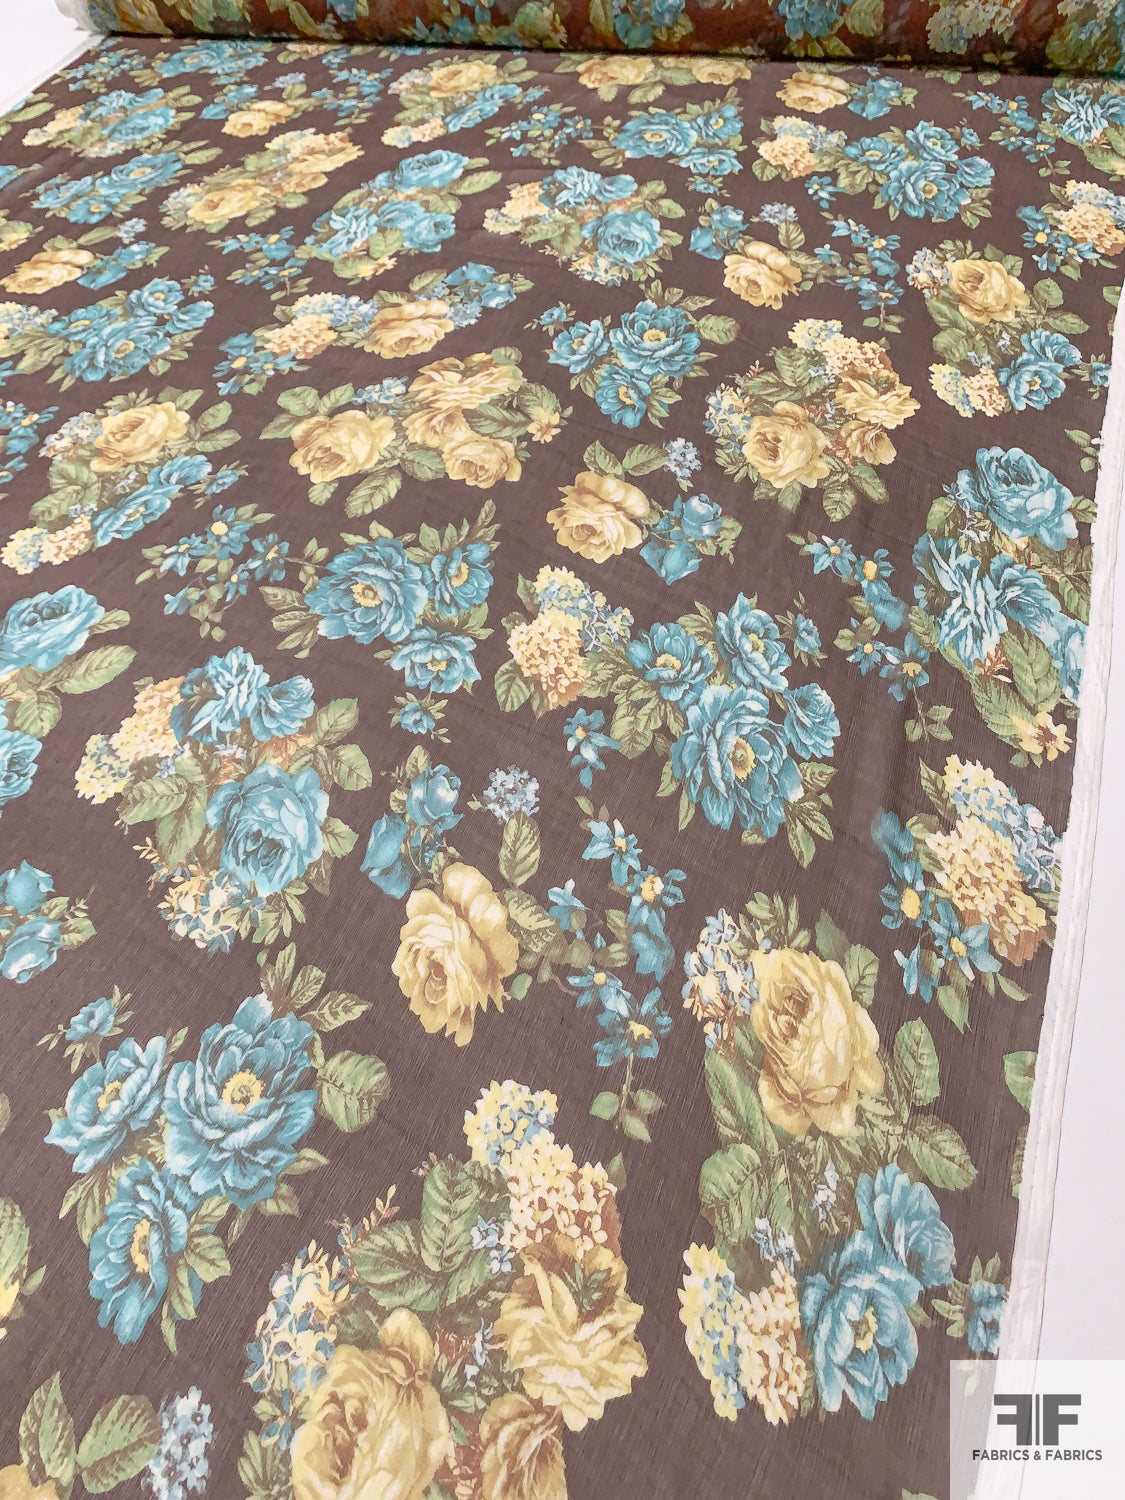 Italian Floral Printed Fine Crinkled Silk Chiffon - Brown / Turquoise / Yellow / Green